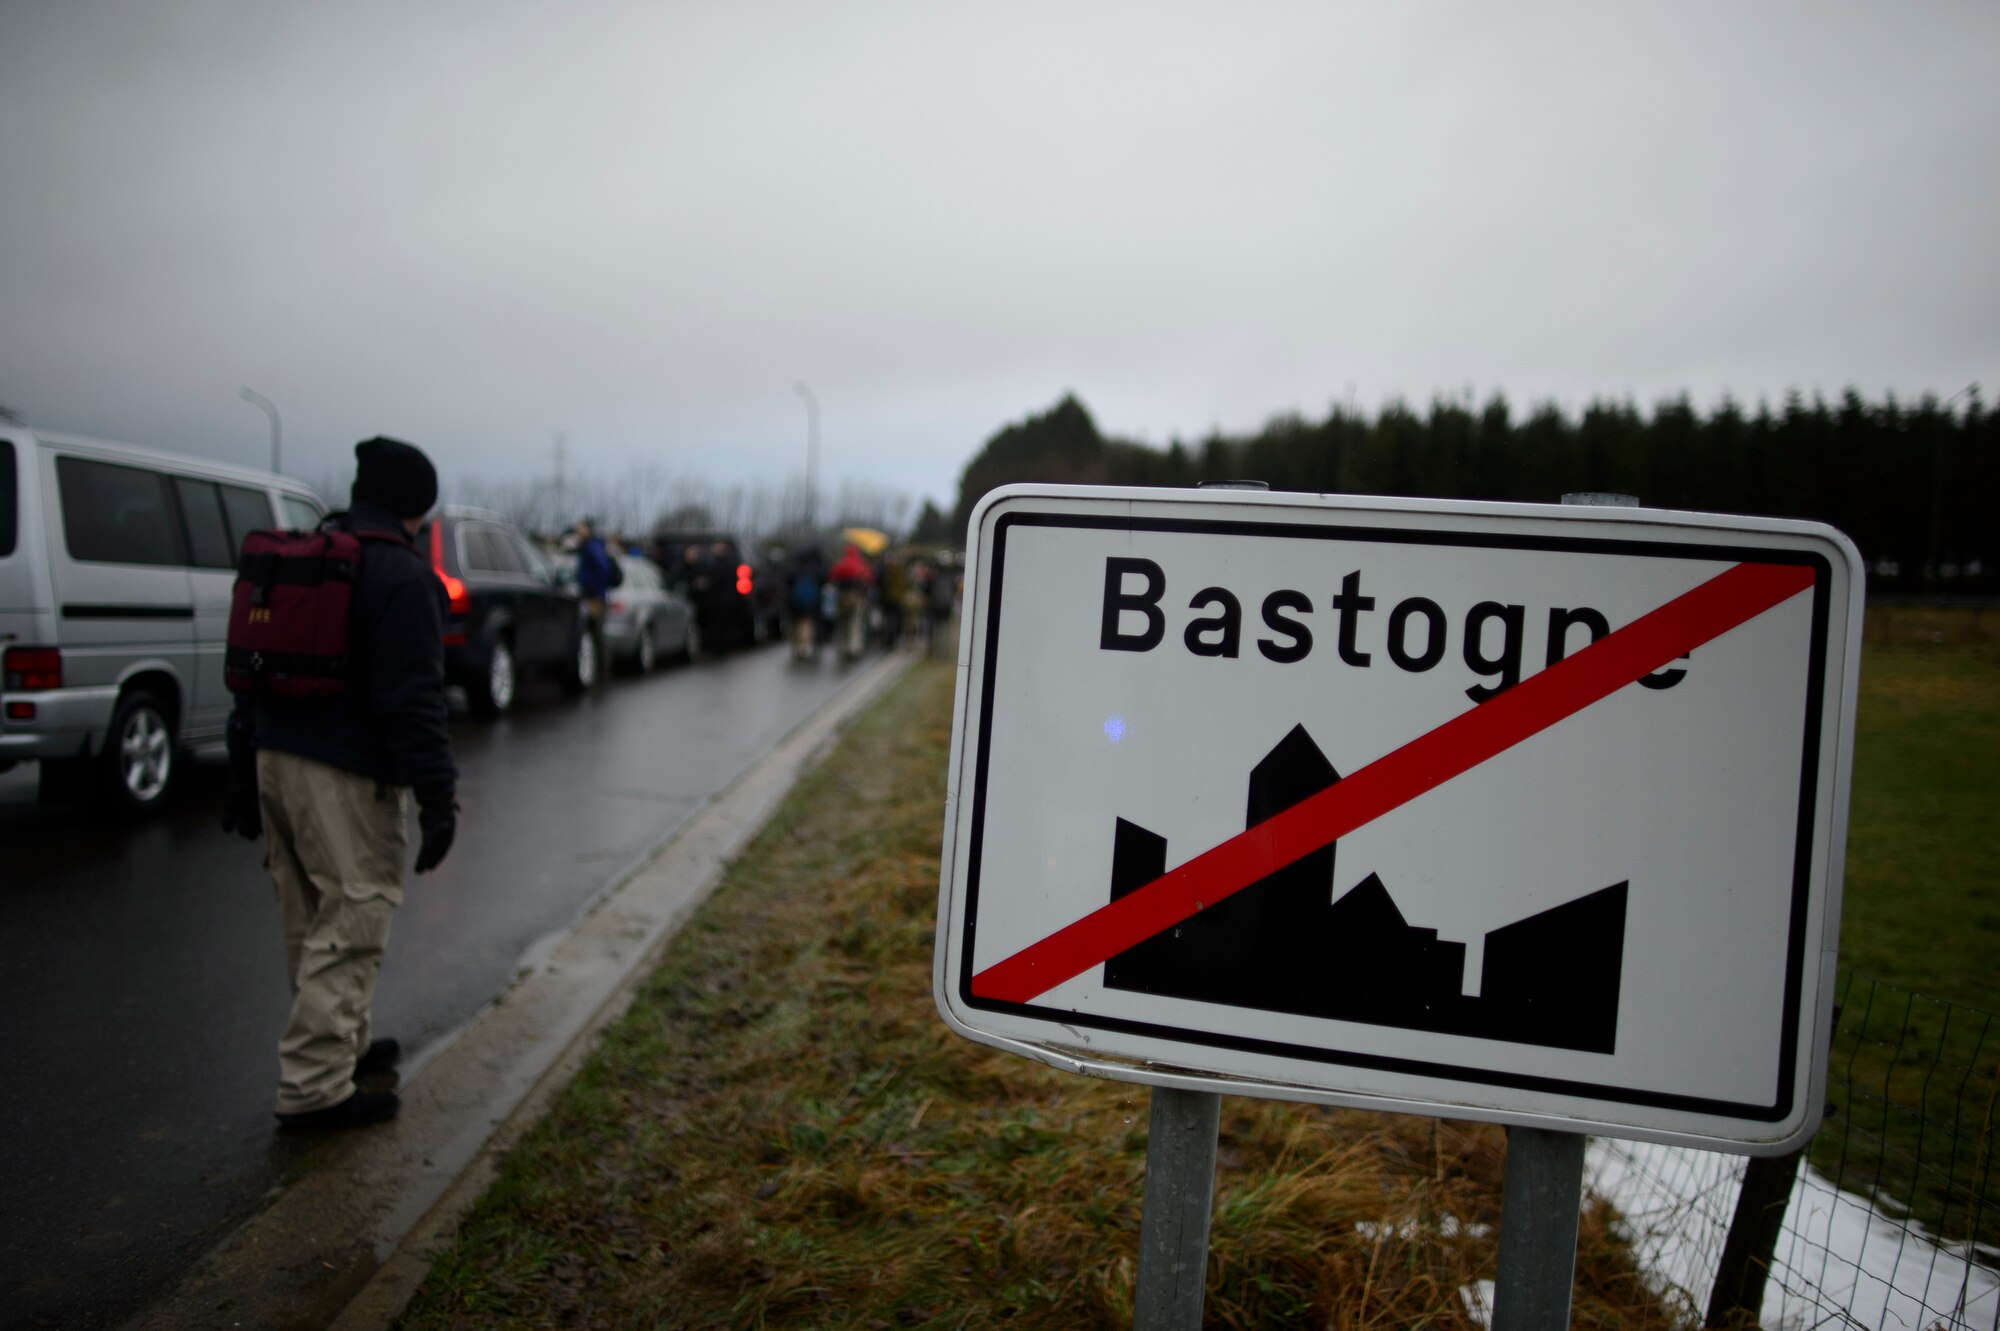 BASTOGNE, Belgium – Participants walk along the route that once served as the perimeter that U.S. forces defended against German military advances in December 1944. This was the 35th Annual Bastogne Historic Walk, and the 68th anniversary of the siege. (U.S. Air Force photo by Staff Sgt. Nathanael Callon/Released)